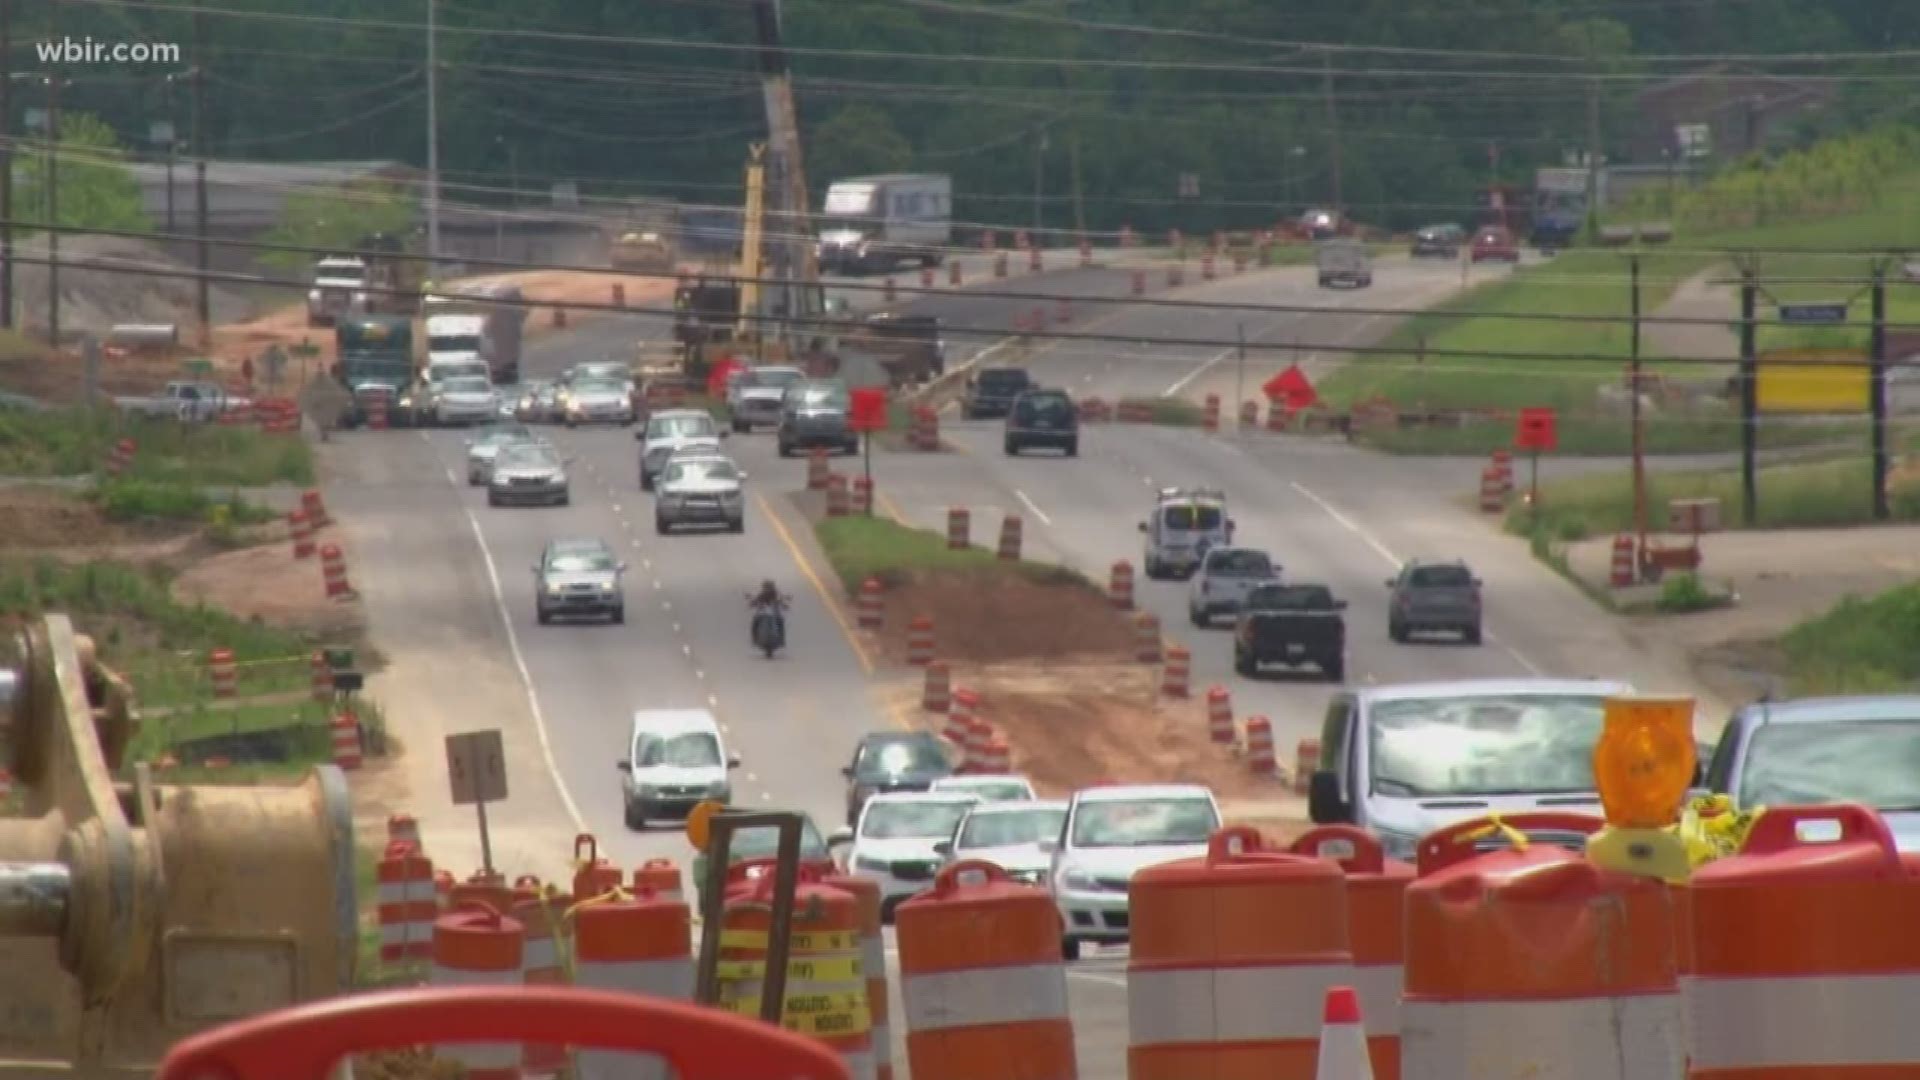 As construction on Alcoa Highway continues, people living in the area are looking to the future.